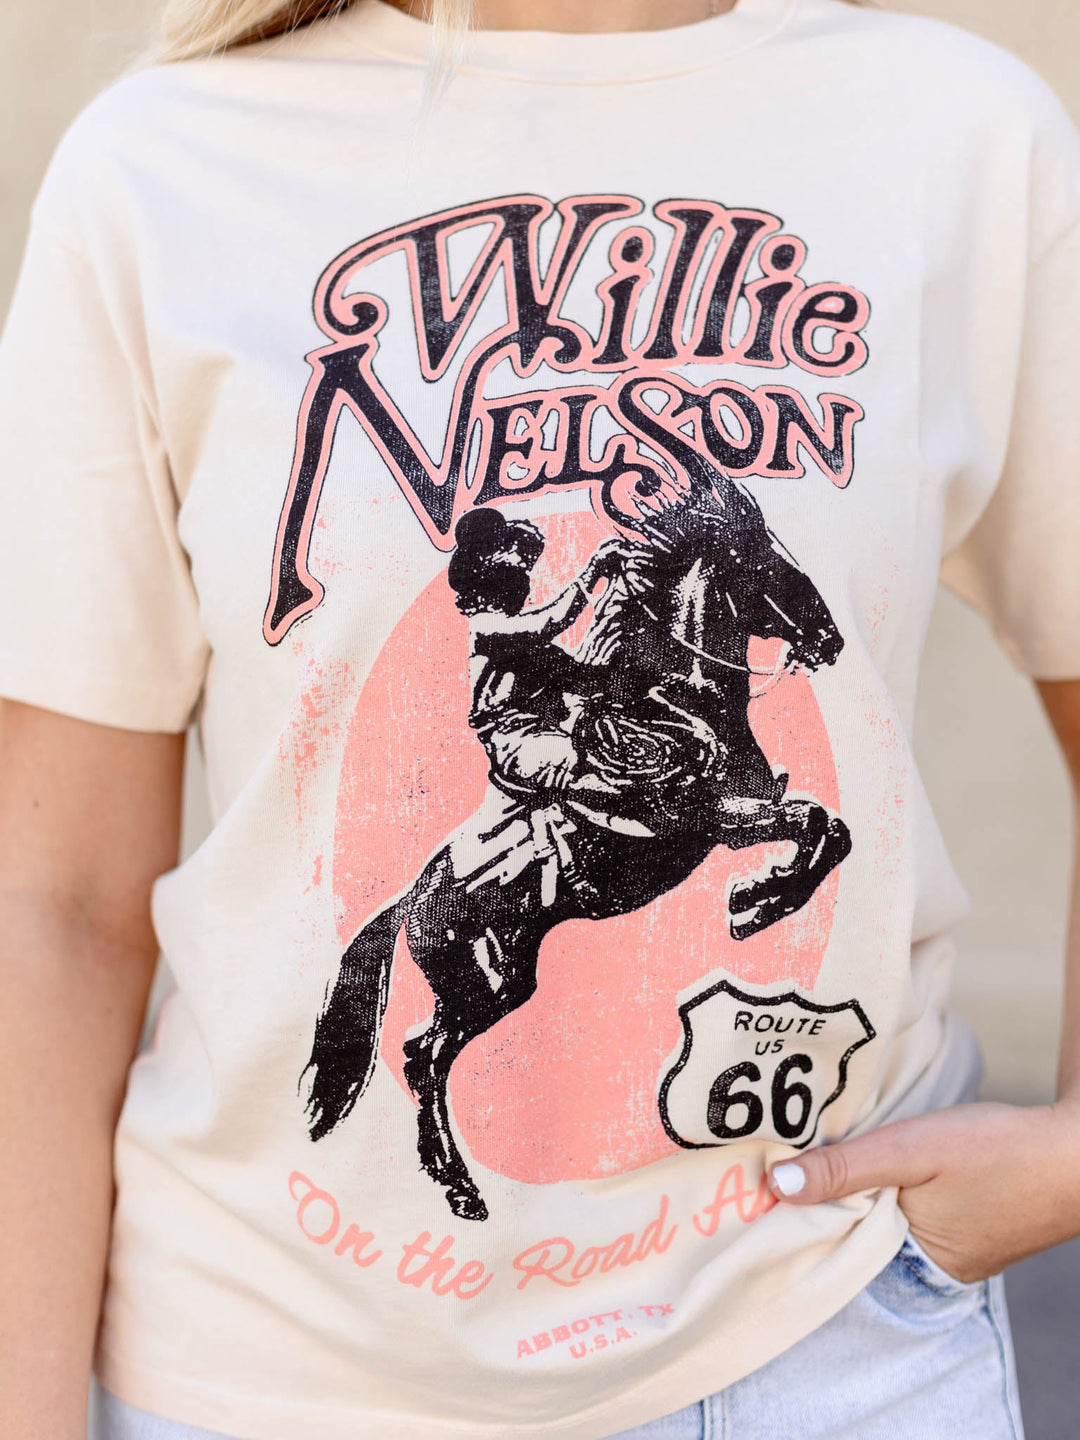 Daydreamer Willie Nelson Route 66 Weekend TeeScreen tees